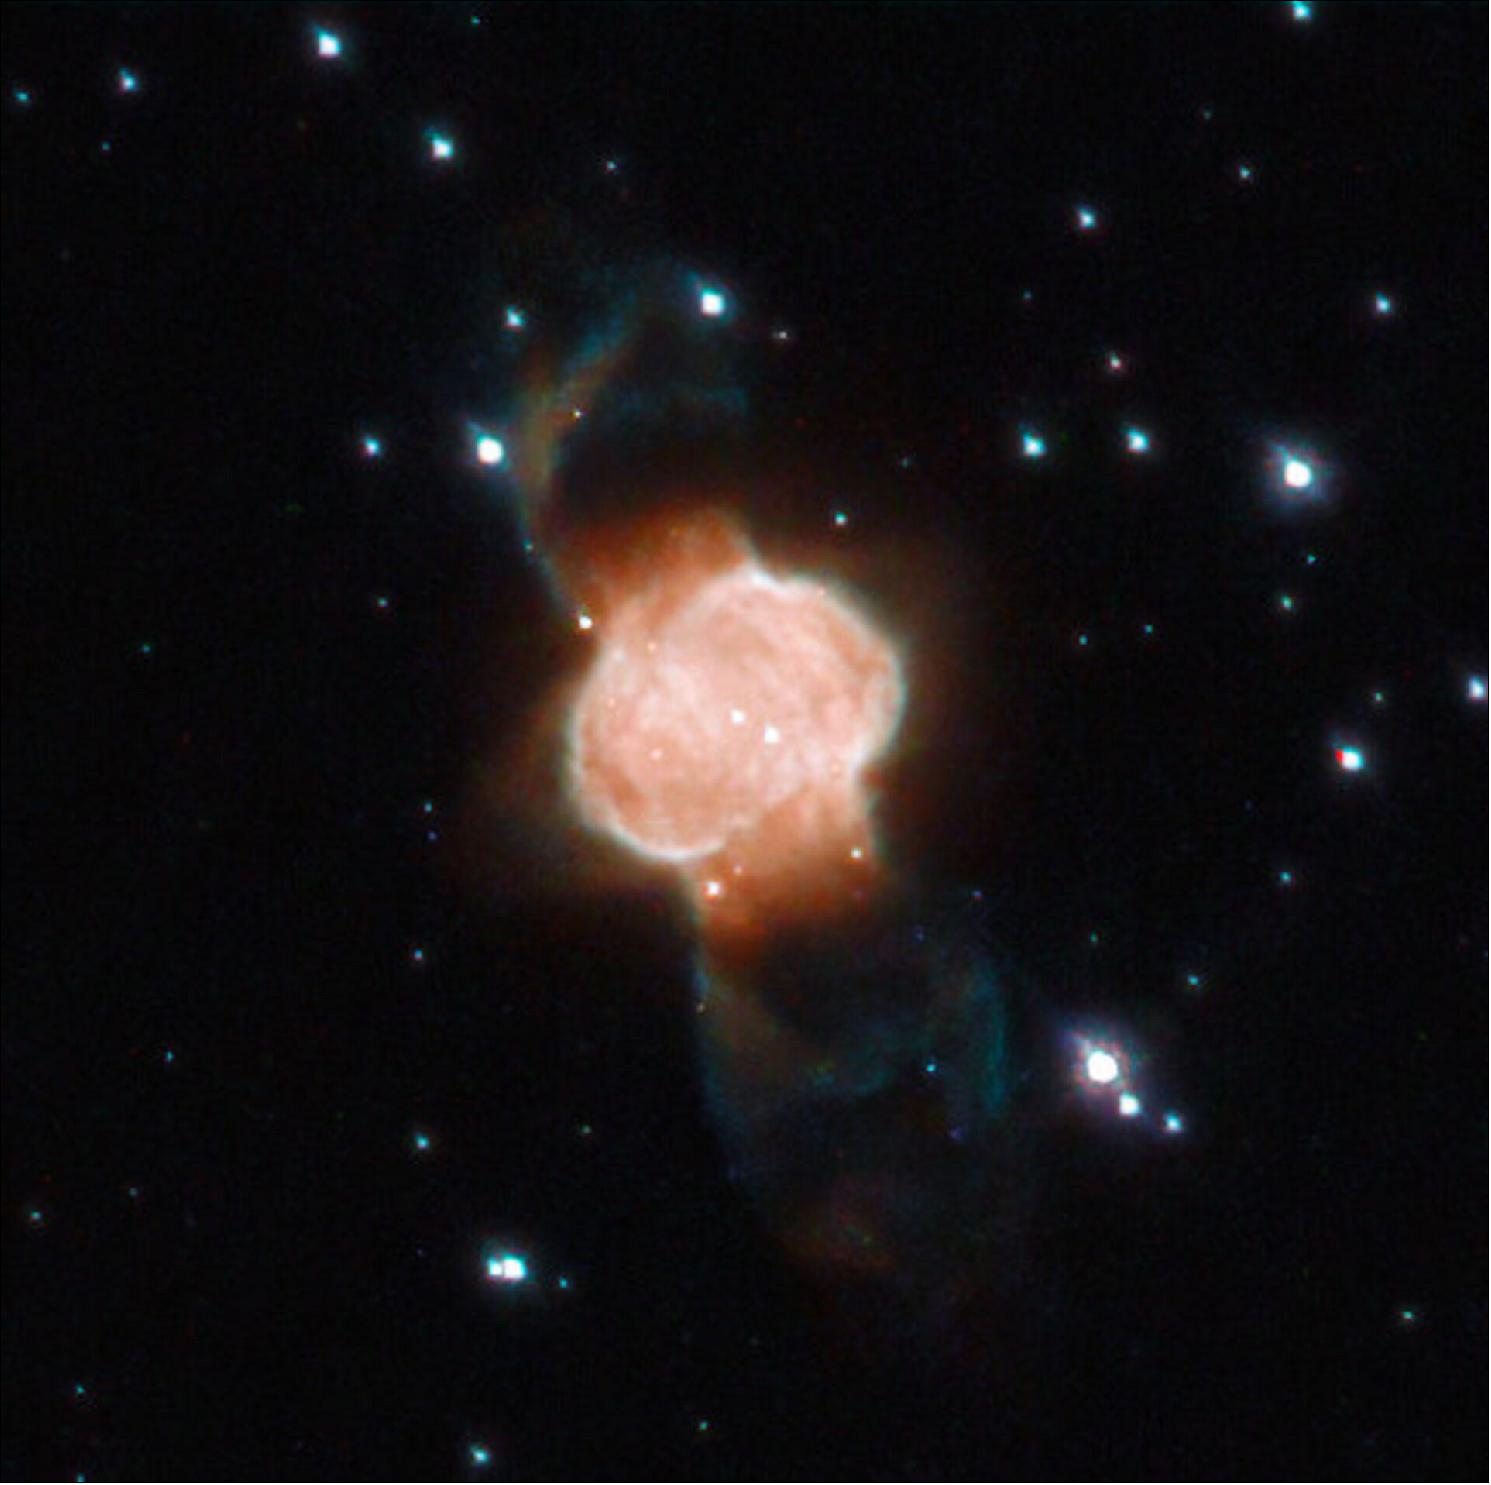 Figure 116: Portrait of M1-63, a beautiful example of a bipolar planetary nebula located in the constellation of Scutum, captured by the Hubble Space Telescope (image credit: ESA/Hubble & NASA, L. Stanghellini)